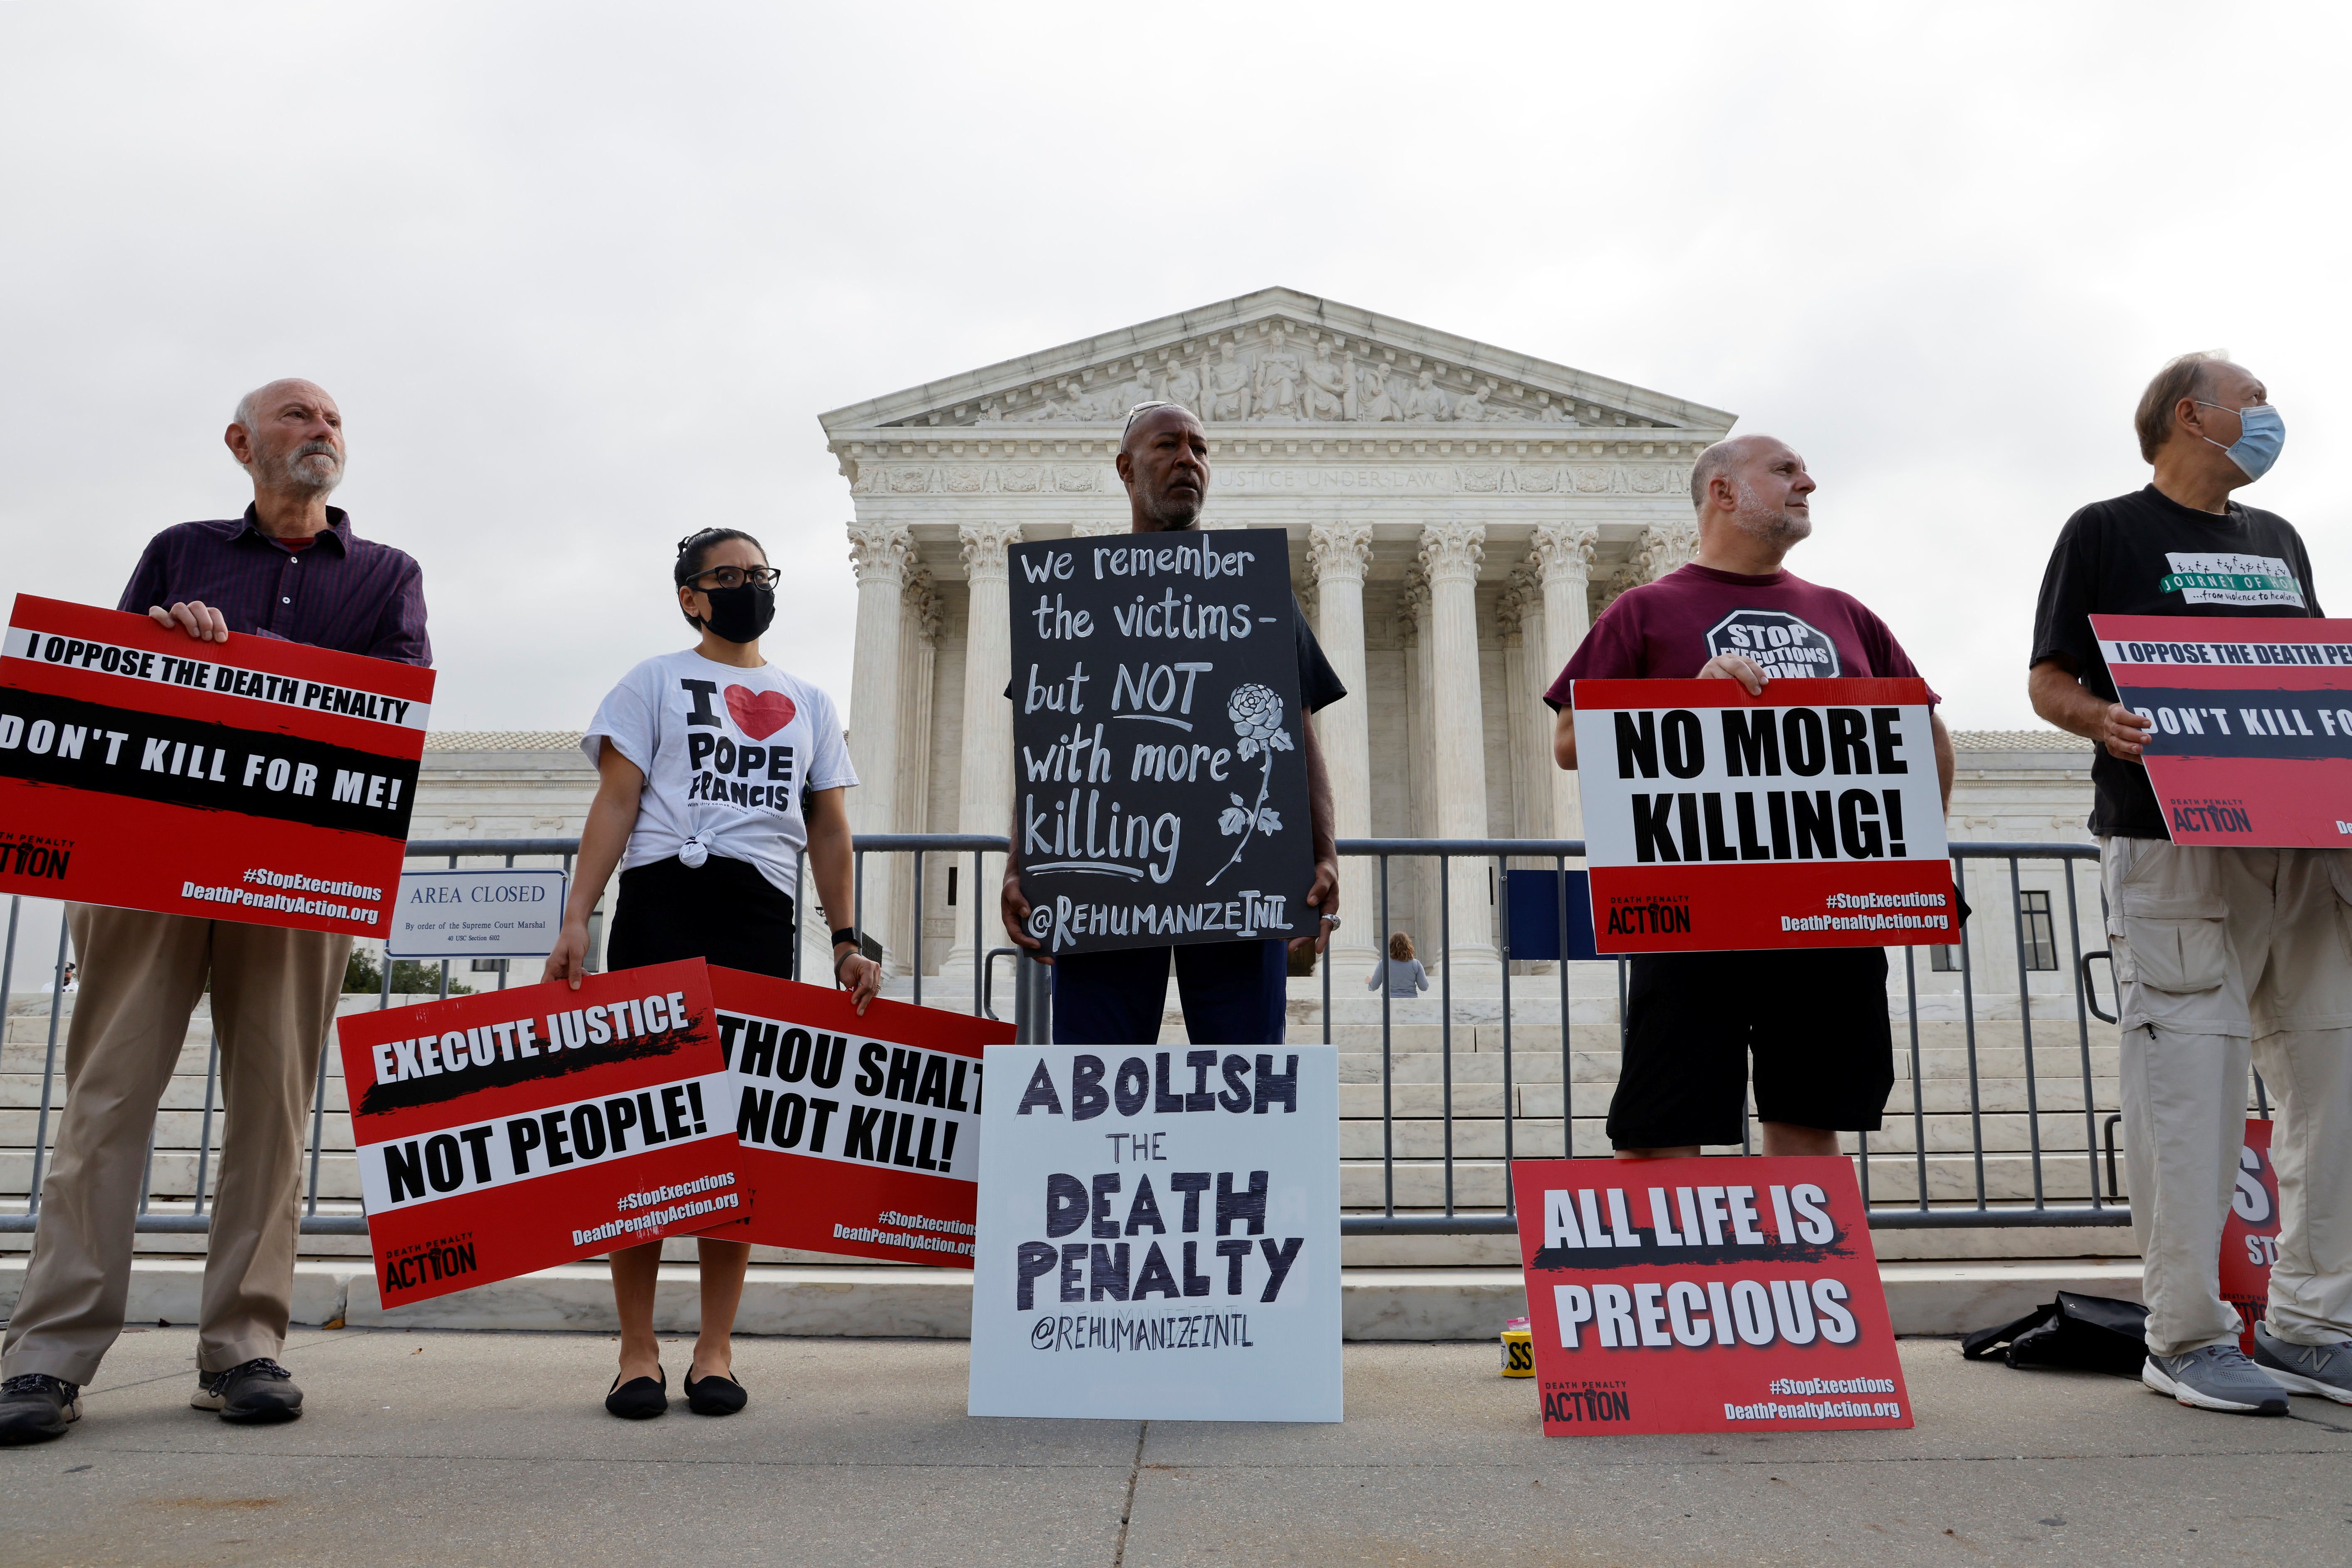 Demonstrators rally against the death penalty outside the US Supreme Court in Washington DC